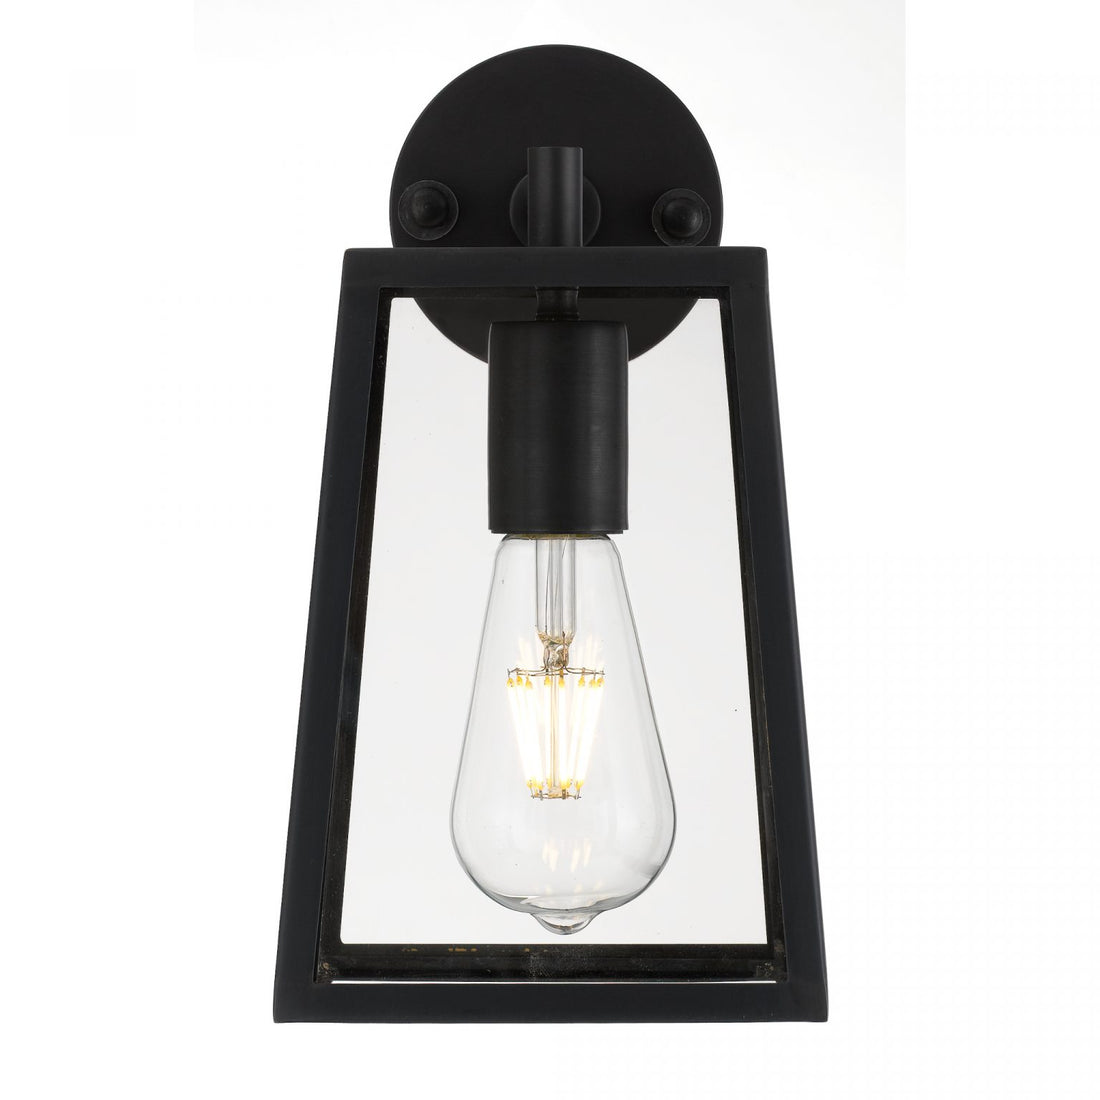 Cantena 15cm Black with Clear Glass Panel Exterior Coach Light